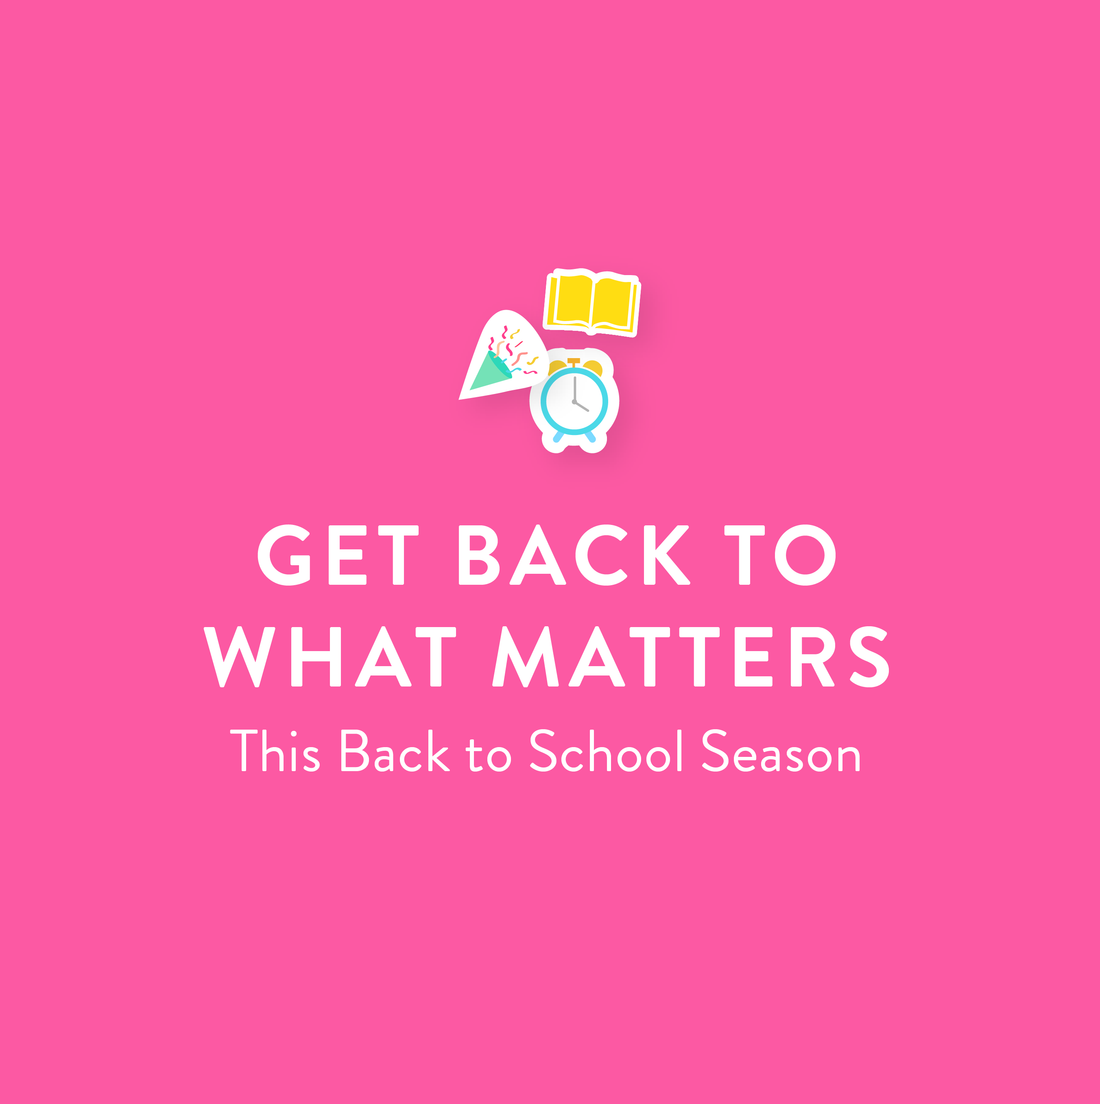 Get Back to What Matters This Back to School Season!